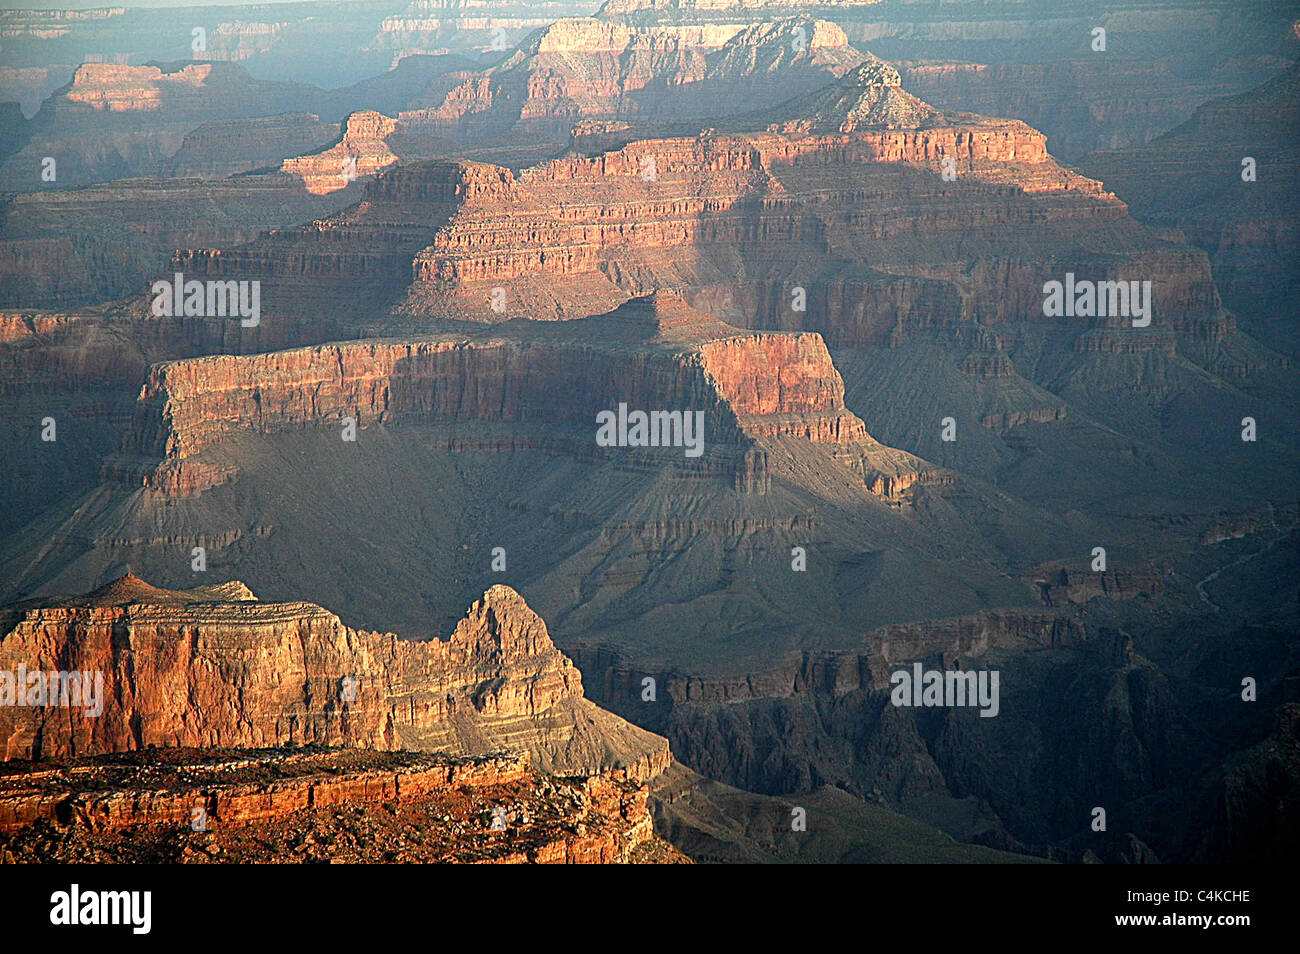 Sunrise highlights the mountains and crags of the Grand Canyon in Arizona. Stock Photo